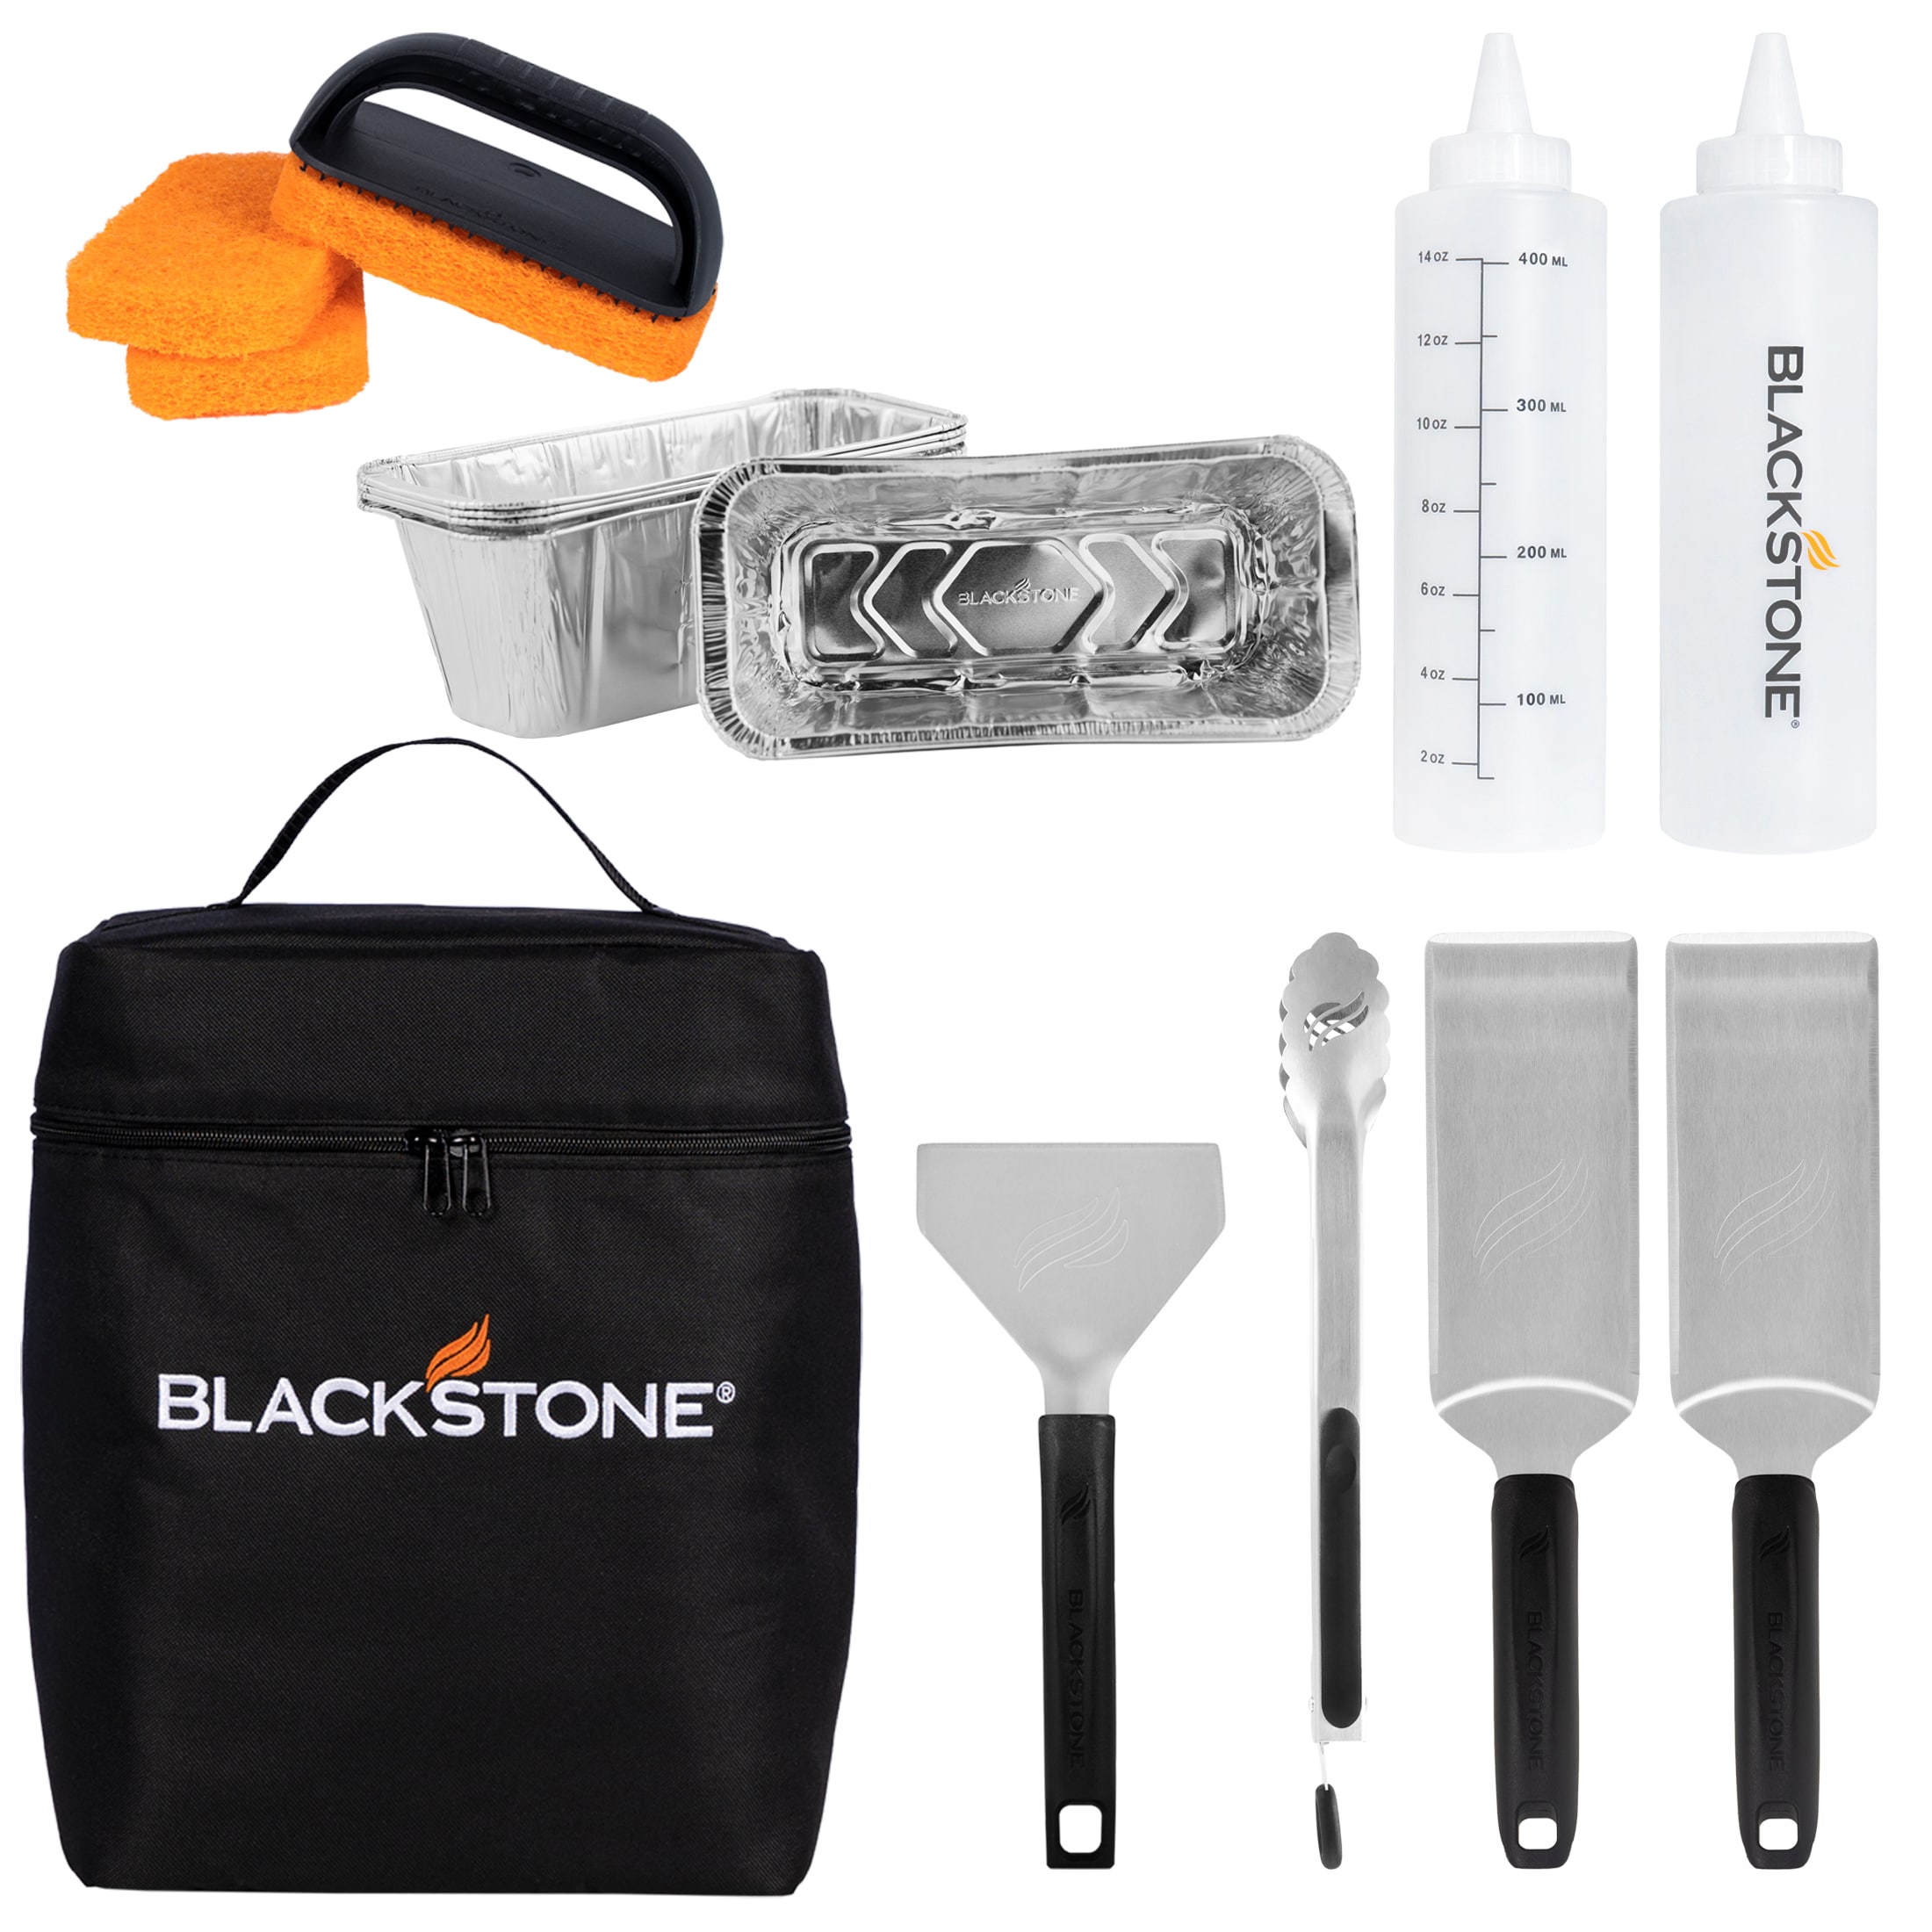 Blackstone My First Griddle Toy Play Set with Plastic Cooking Utensils, 7-Piece